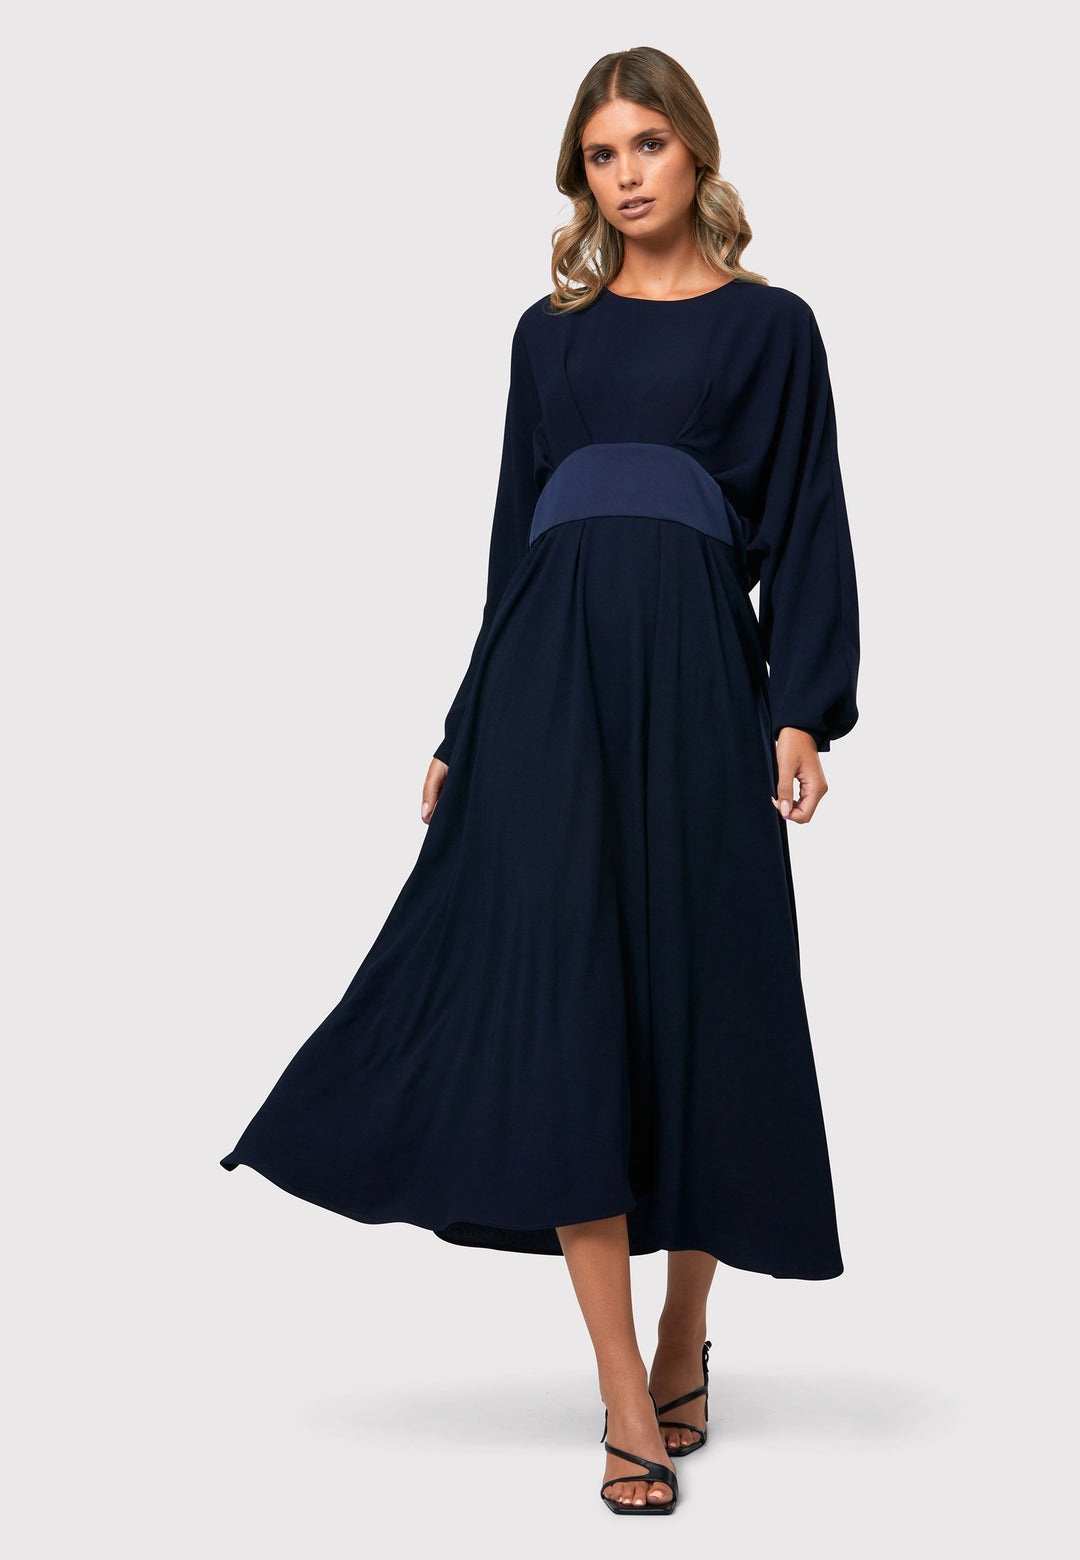 Drew Midnight Navy Dress, an ankle-grazing ensemble crafted from luxurious satin back crepe. This dress exudes elegance with its sophisticated design. The satin empire line panel beautifully accentuates the waist, creating a flattering silhouette. The dress features dropped sleeves, adding a touch of modernity to the overall look. 